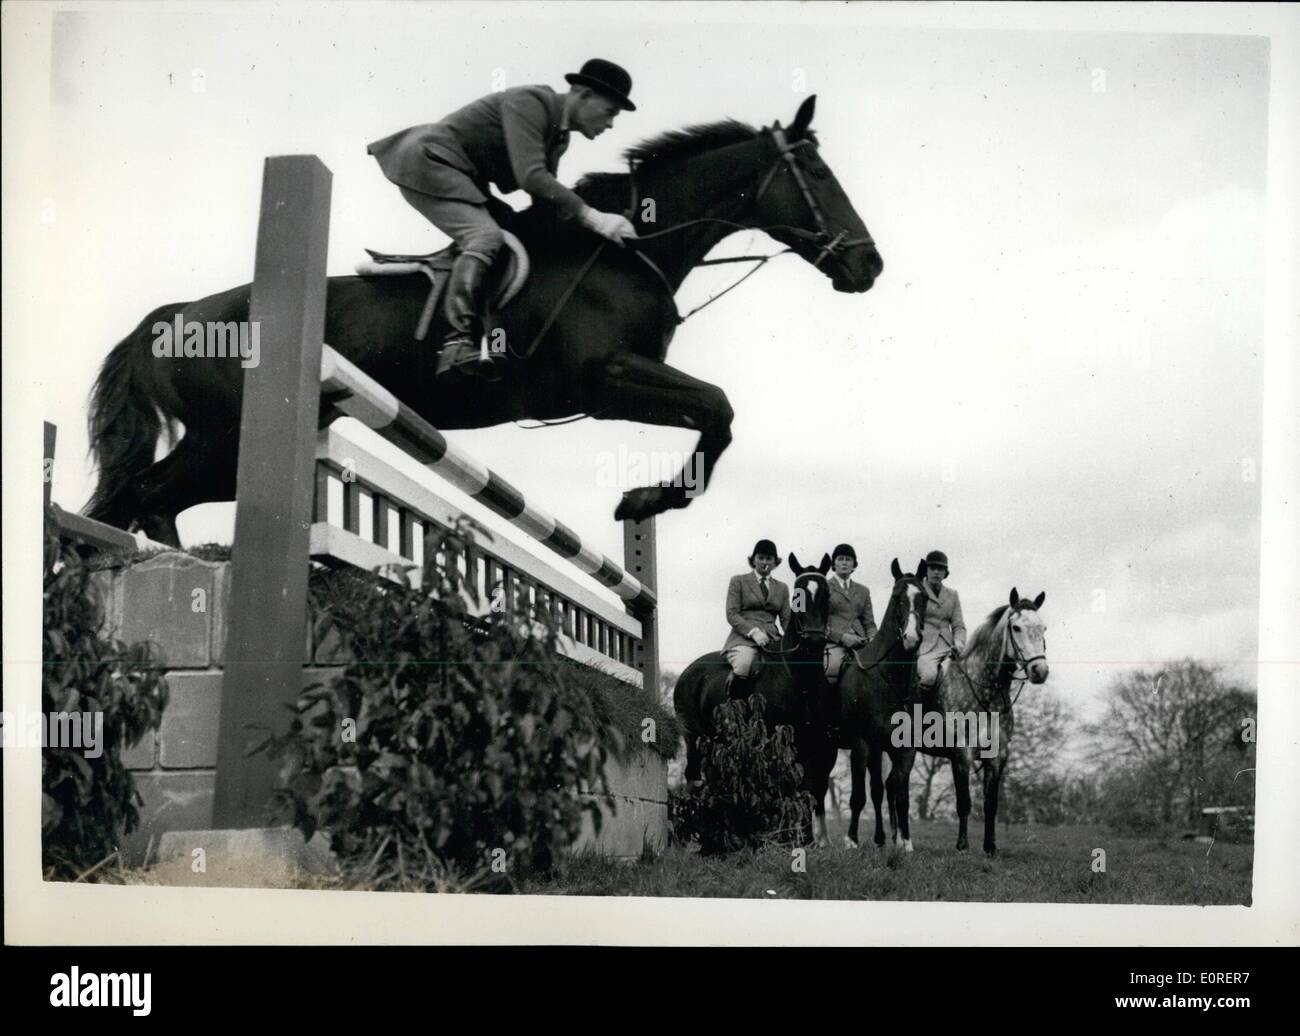 Apr. 08, 1959 - 8-4-59 Course for show jumpers at Arundel Castle. A fortnight's course for our leading show-jumping riders, is being held at Arundel Castle, by permission of the Duke and Duchess of Norfolk. The organization of the course is undertaken by Lt. Col. N.H. Kindersley and tuition is given by Lt. Col. J.A. Talbot-Ponsonby, the Olympic coach. Keystone Photo Shows: Three young members watch another take a jump during the course at Arundel Castle. The lady members are (L to R): Mrs. Stewart Banks, of Nafferton, nr. Driffield, Yorkshire; Miss Mary Barnes, of Benworth, nr Stock Photo